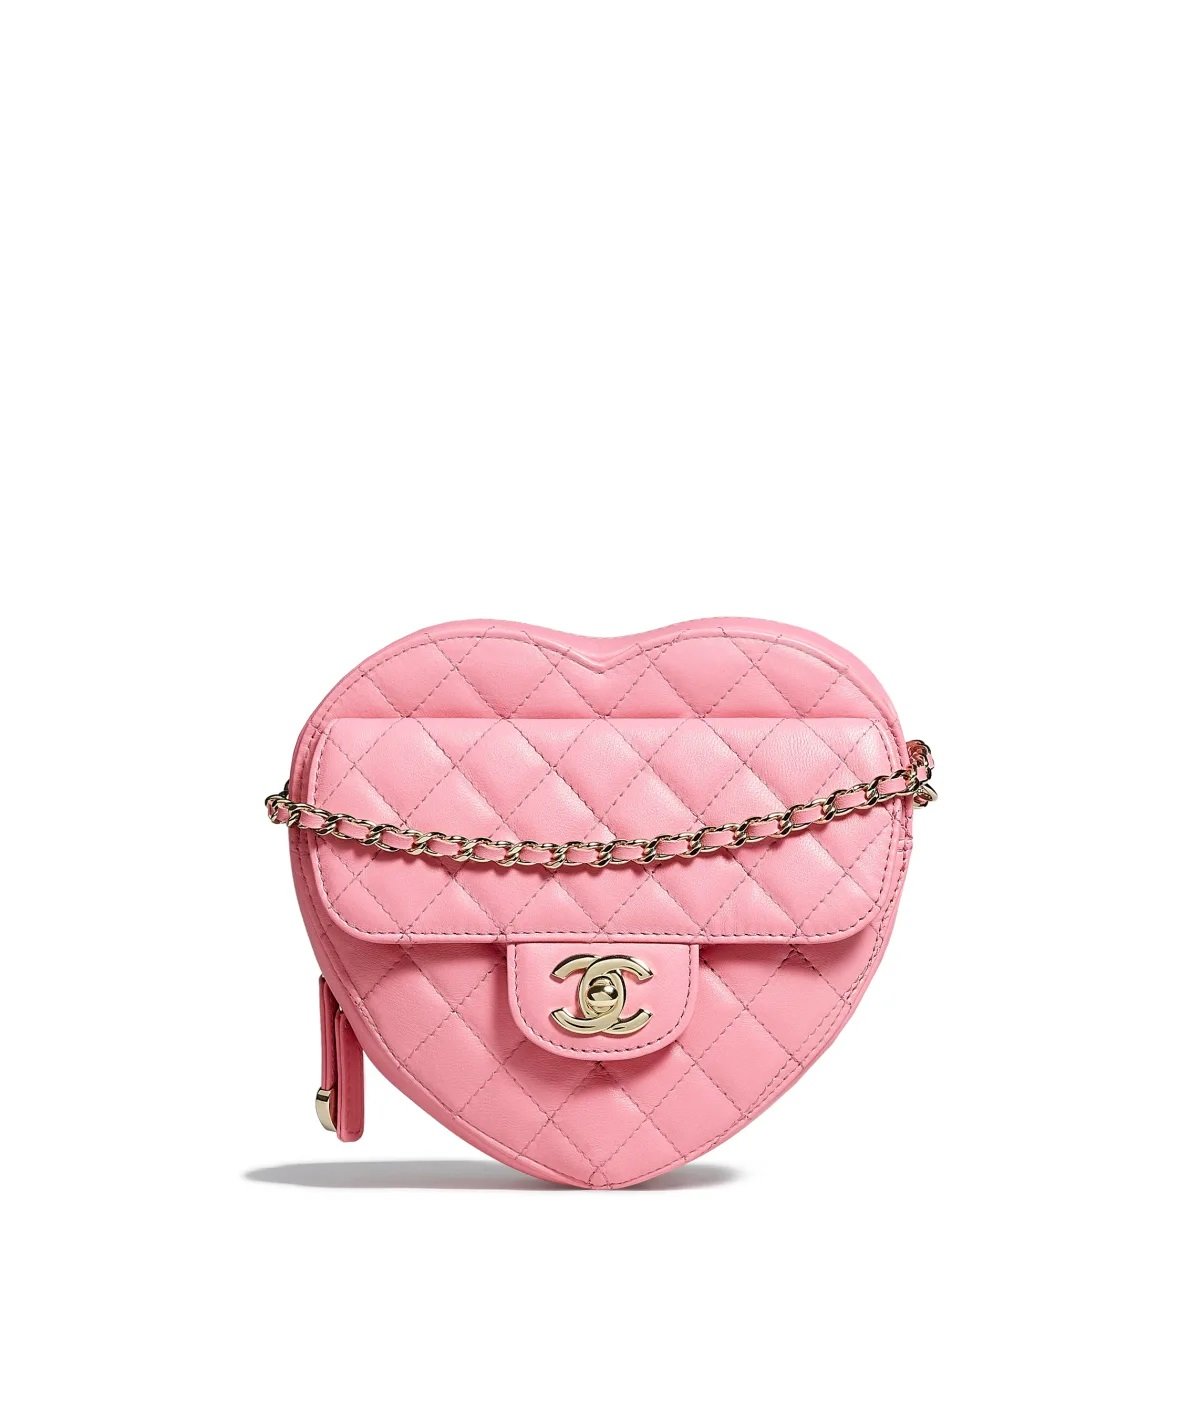 Chanel Heart Bag in Coral Pink Lambskin with Gold-Tone Metal.jpg